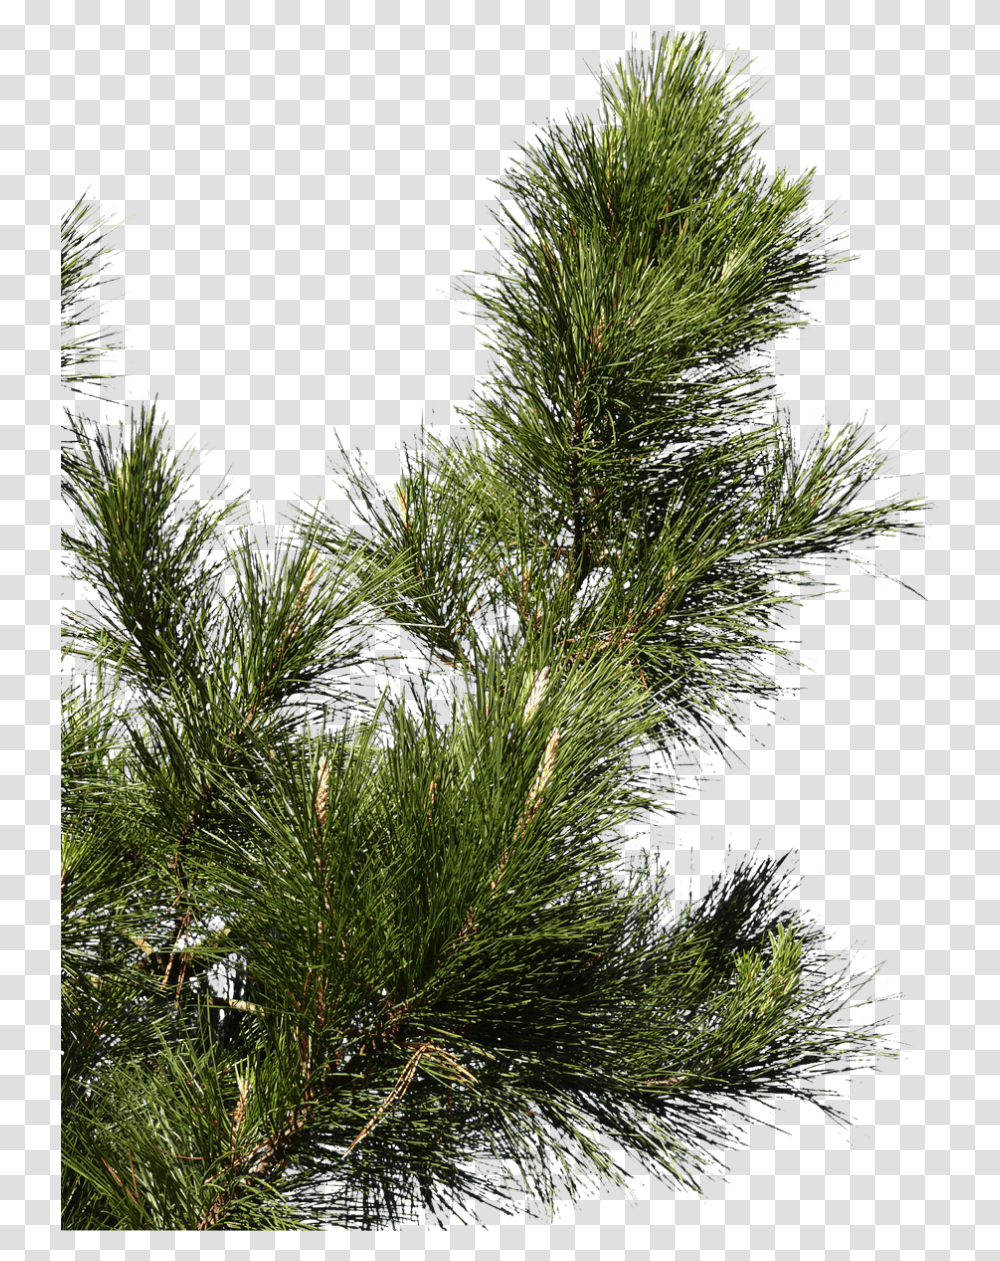 Pine Branch 02 Free Texture Download Branch Of Pine Tree, Plant, Conifer, Fir, Abies Transparent Png